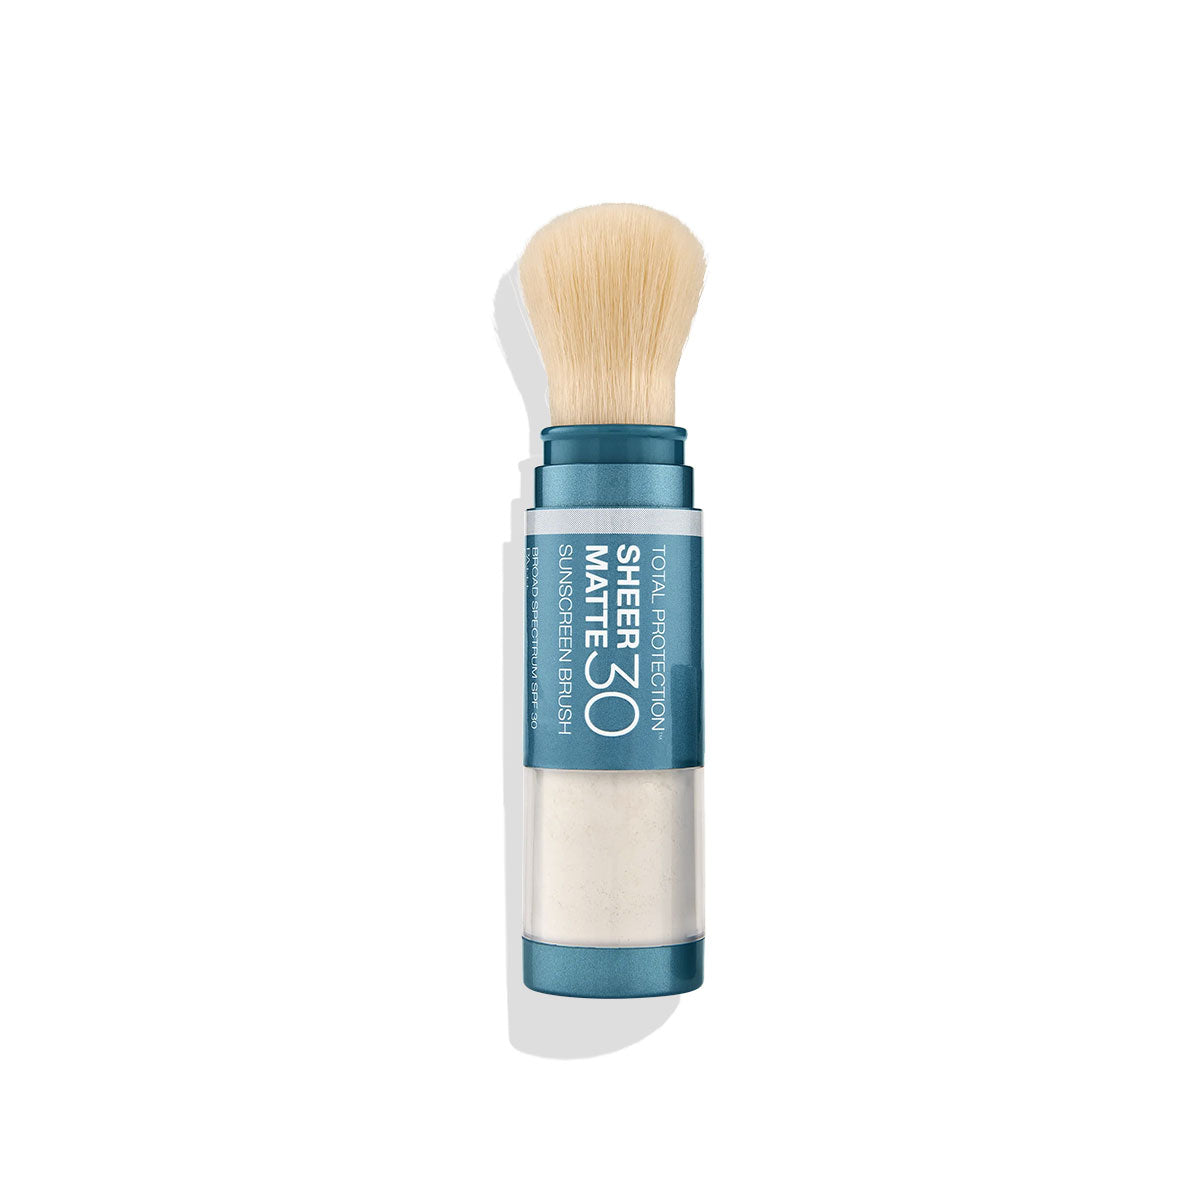 colorescience Sunforgettable Total Protection Sheer Matte SPF 30 Sunscreen Brush